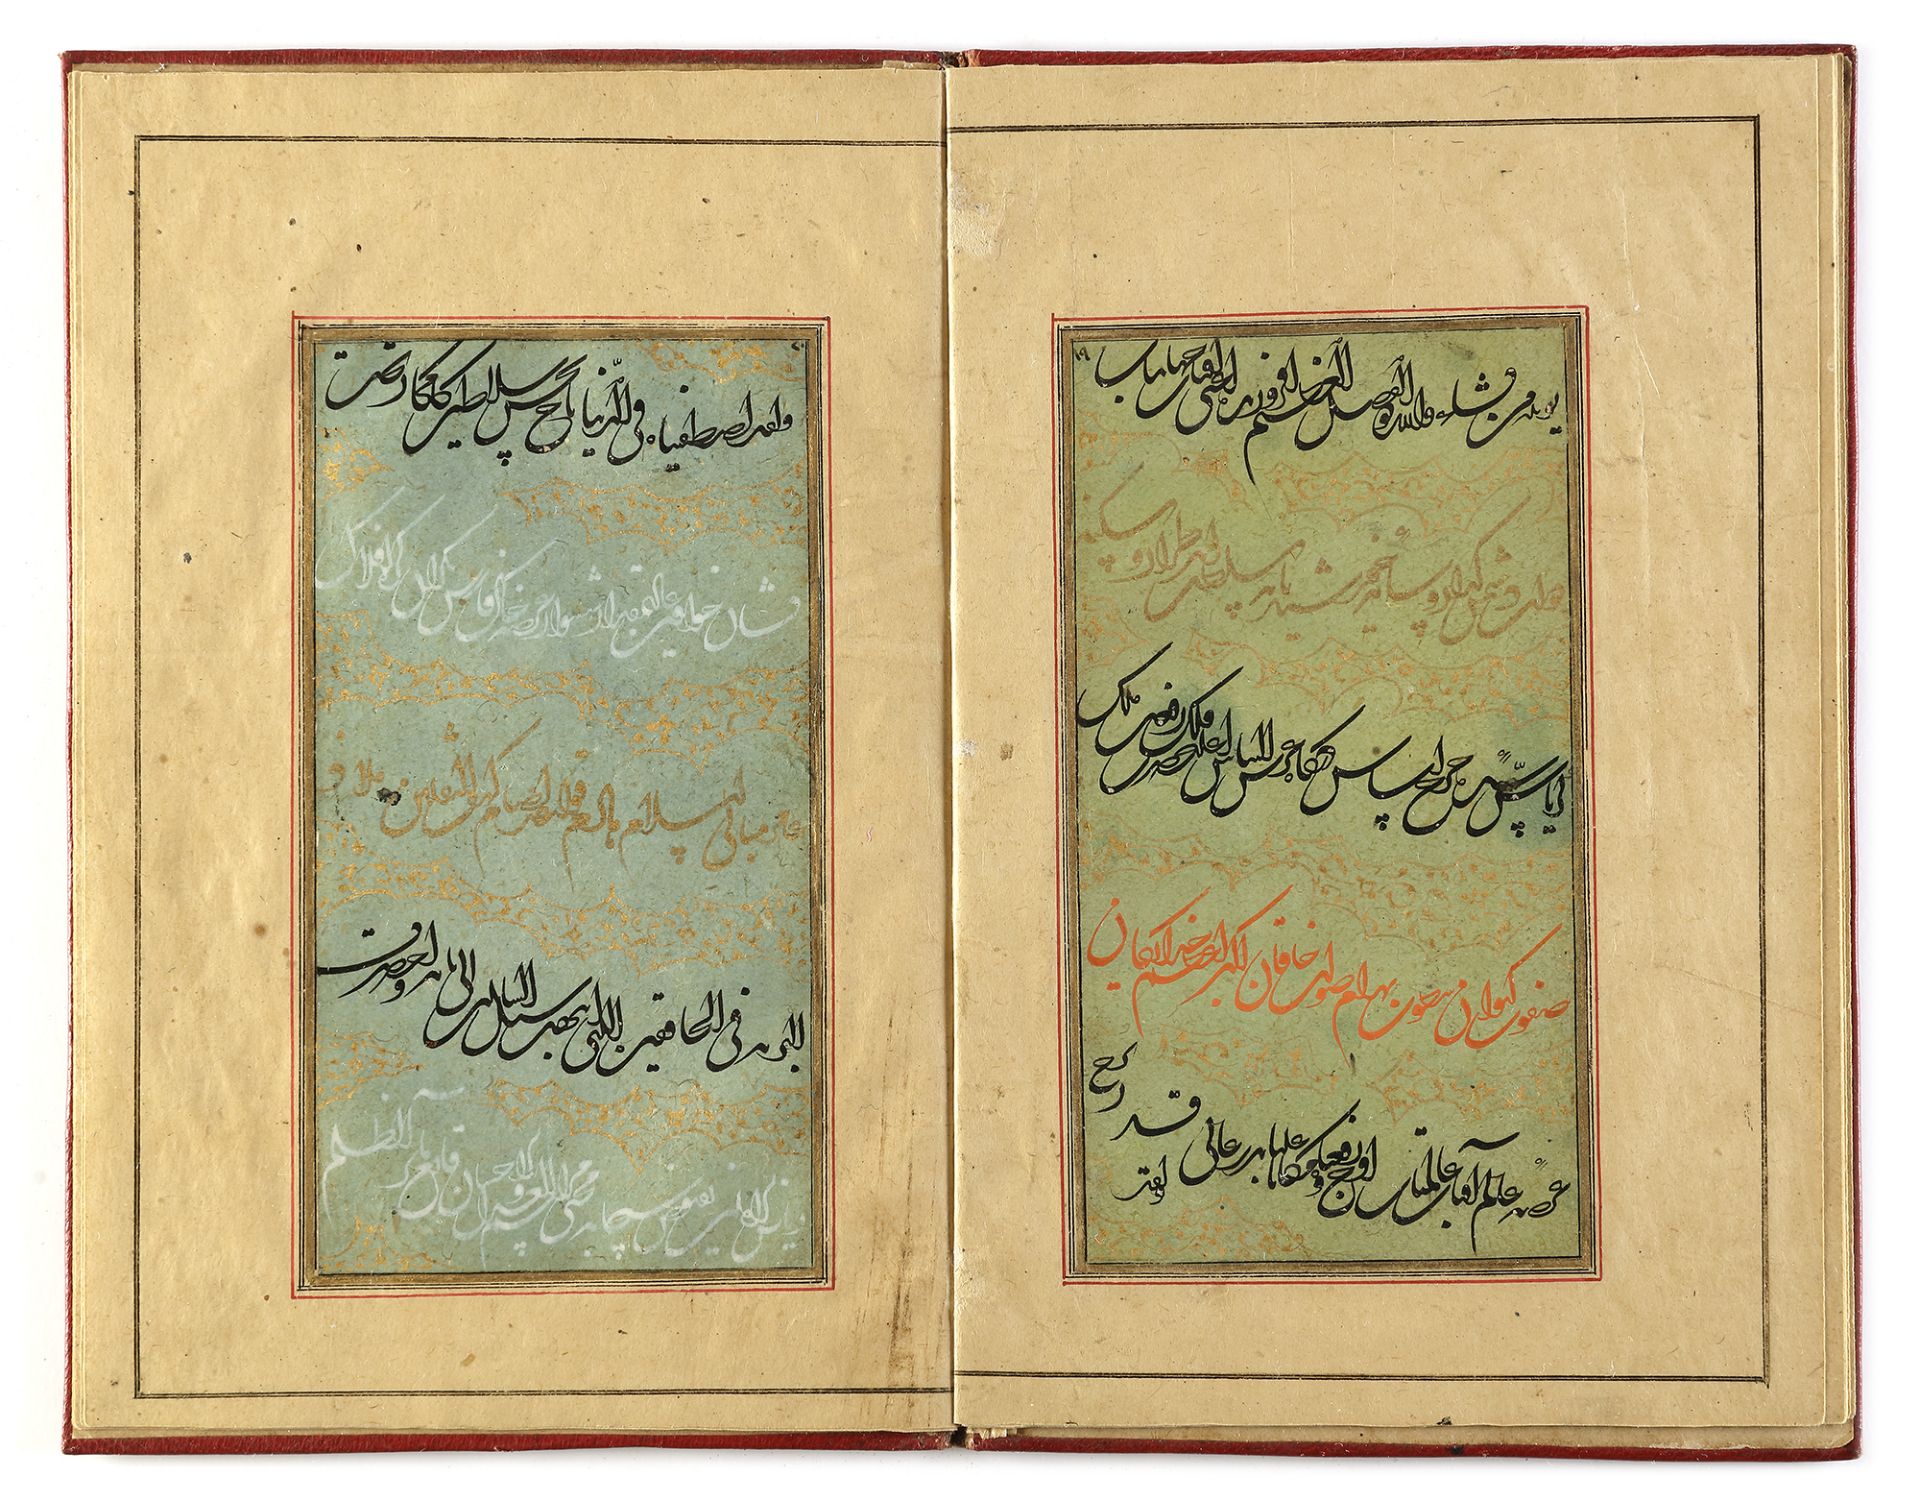 A MANUSCRIPT OF POETRY, SIGNED BY IKHTIYAR AL-MUNSHI, PERSIA, SAVAFID, DATED 975 AH/1567-68 AD - Image 9 of 18